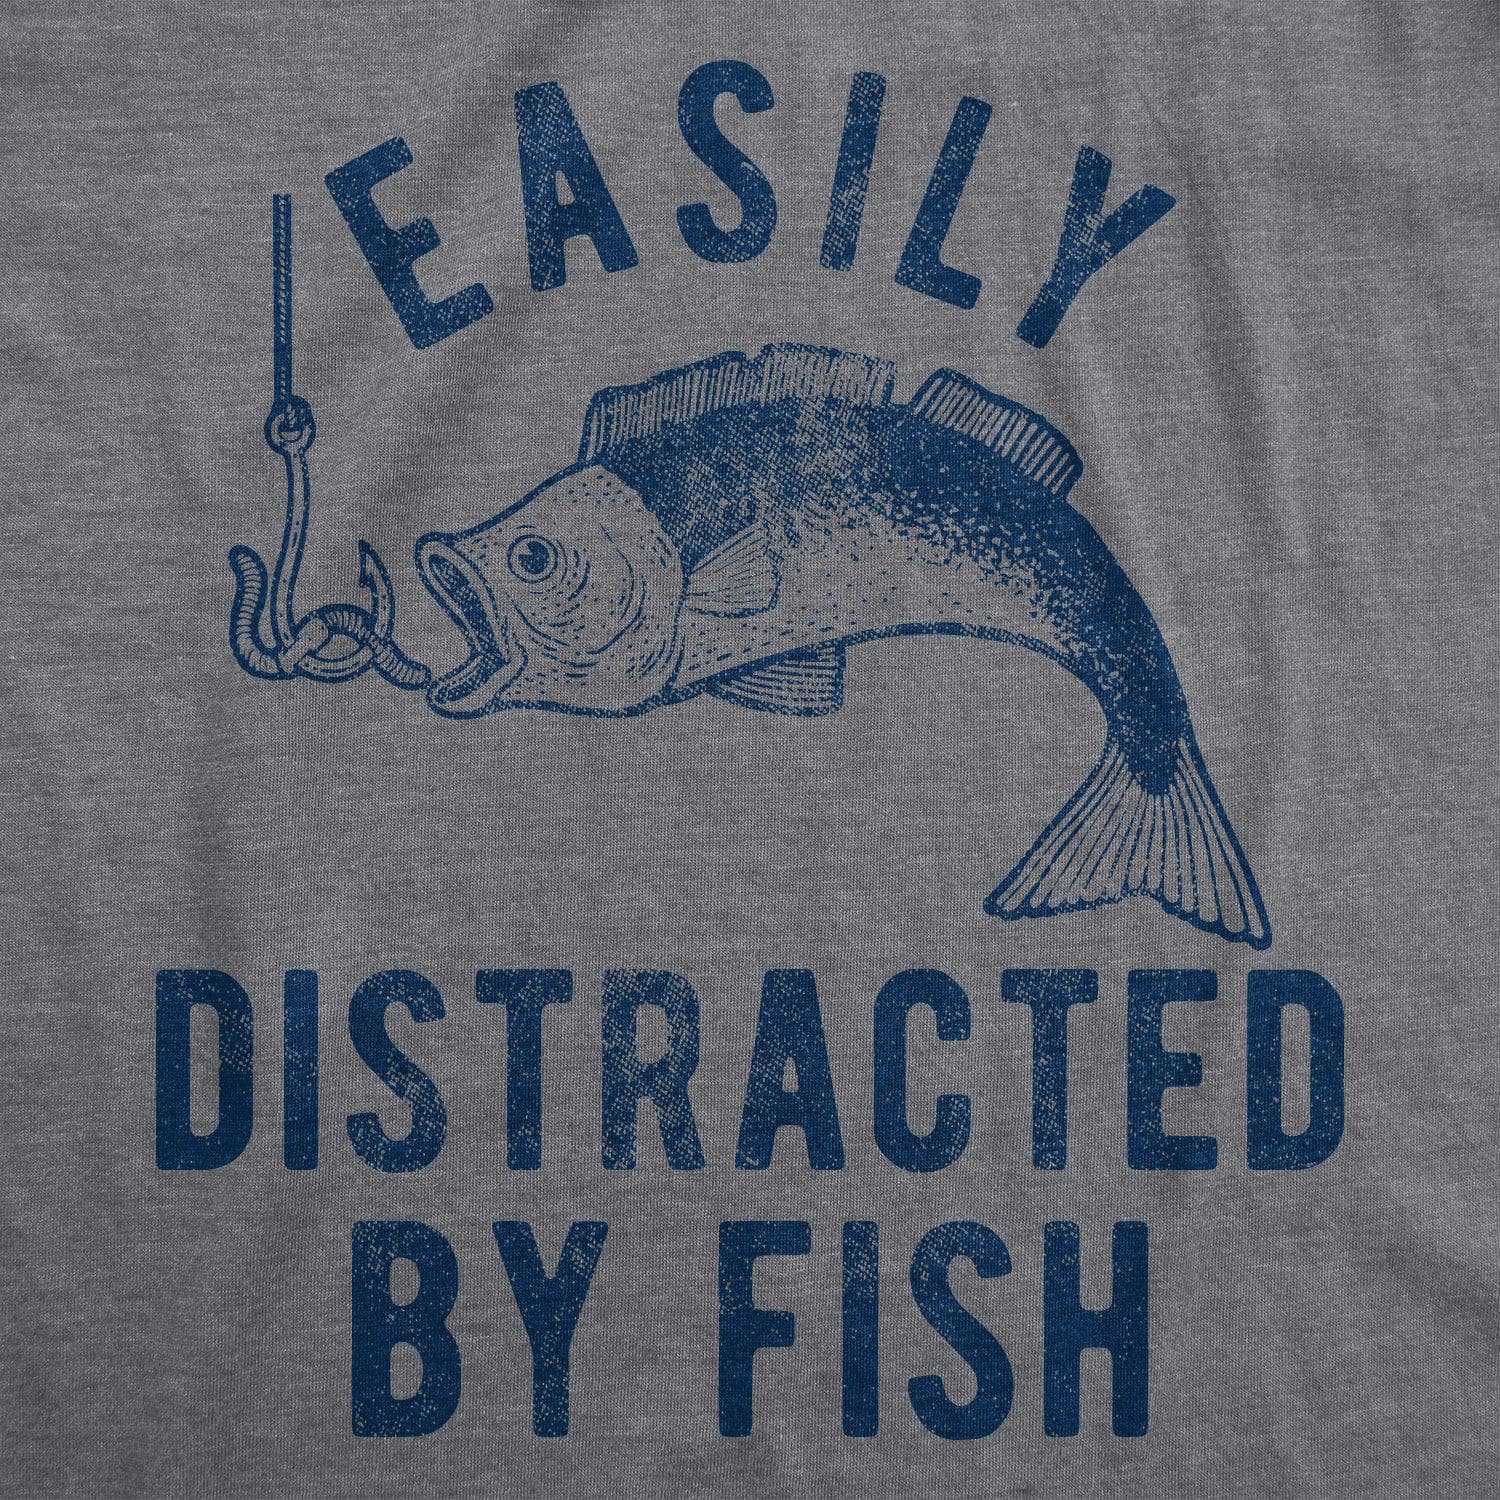 Easily Distracted By Fish Men's Tshirt  -  Crazy Dog T-Shirts